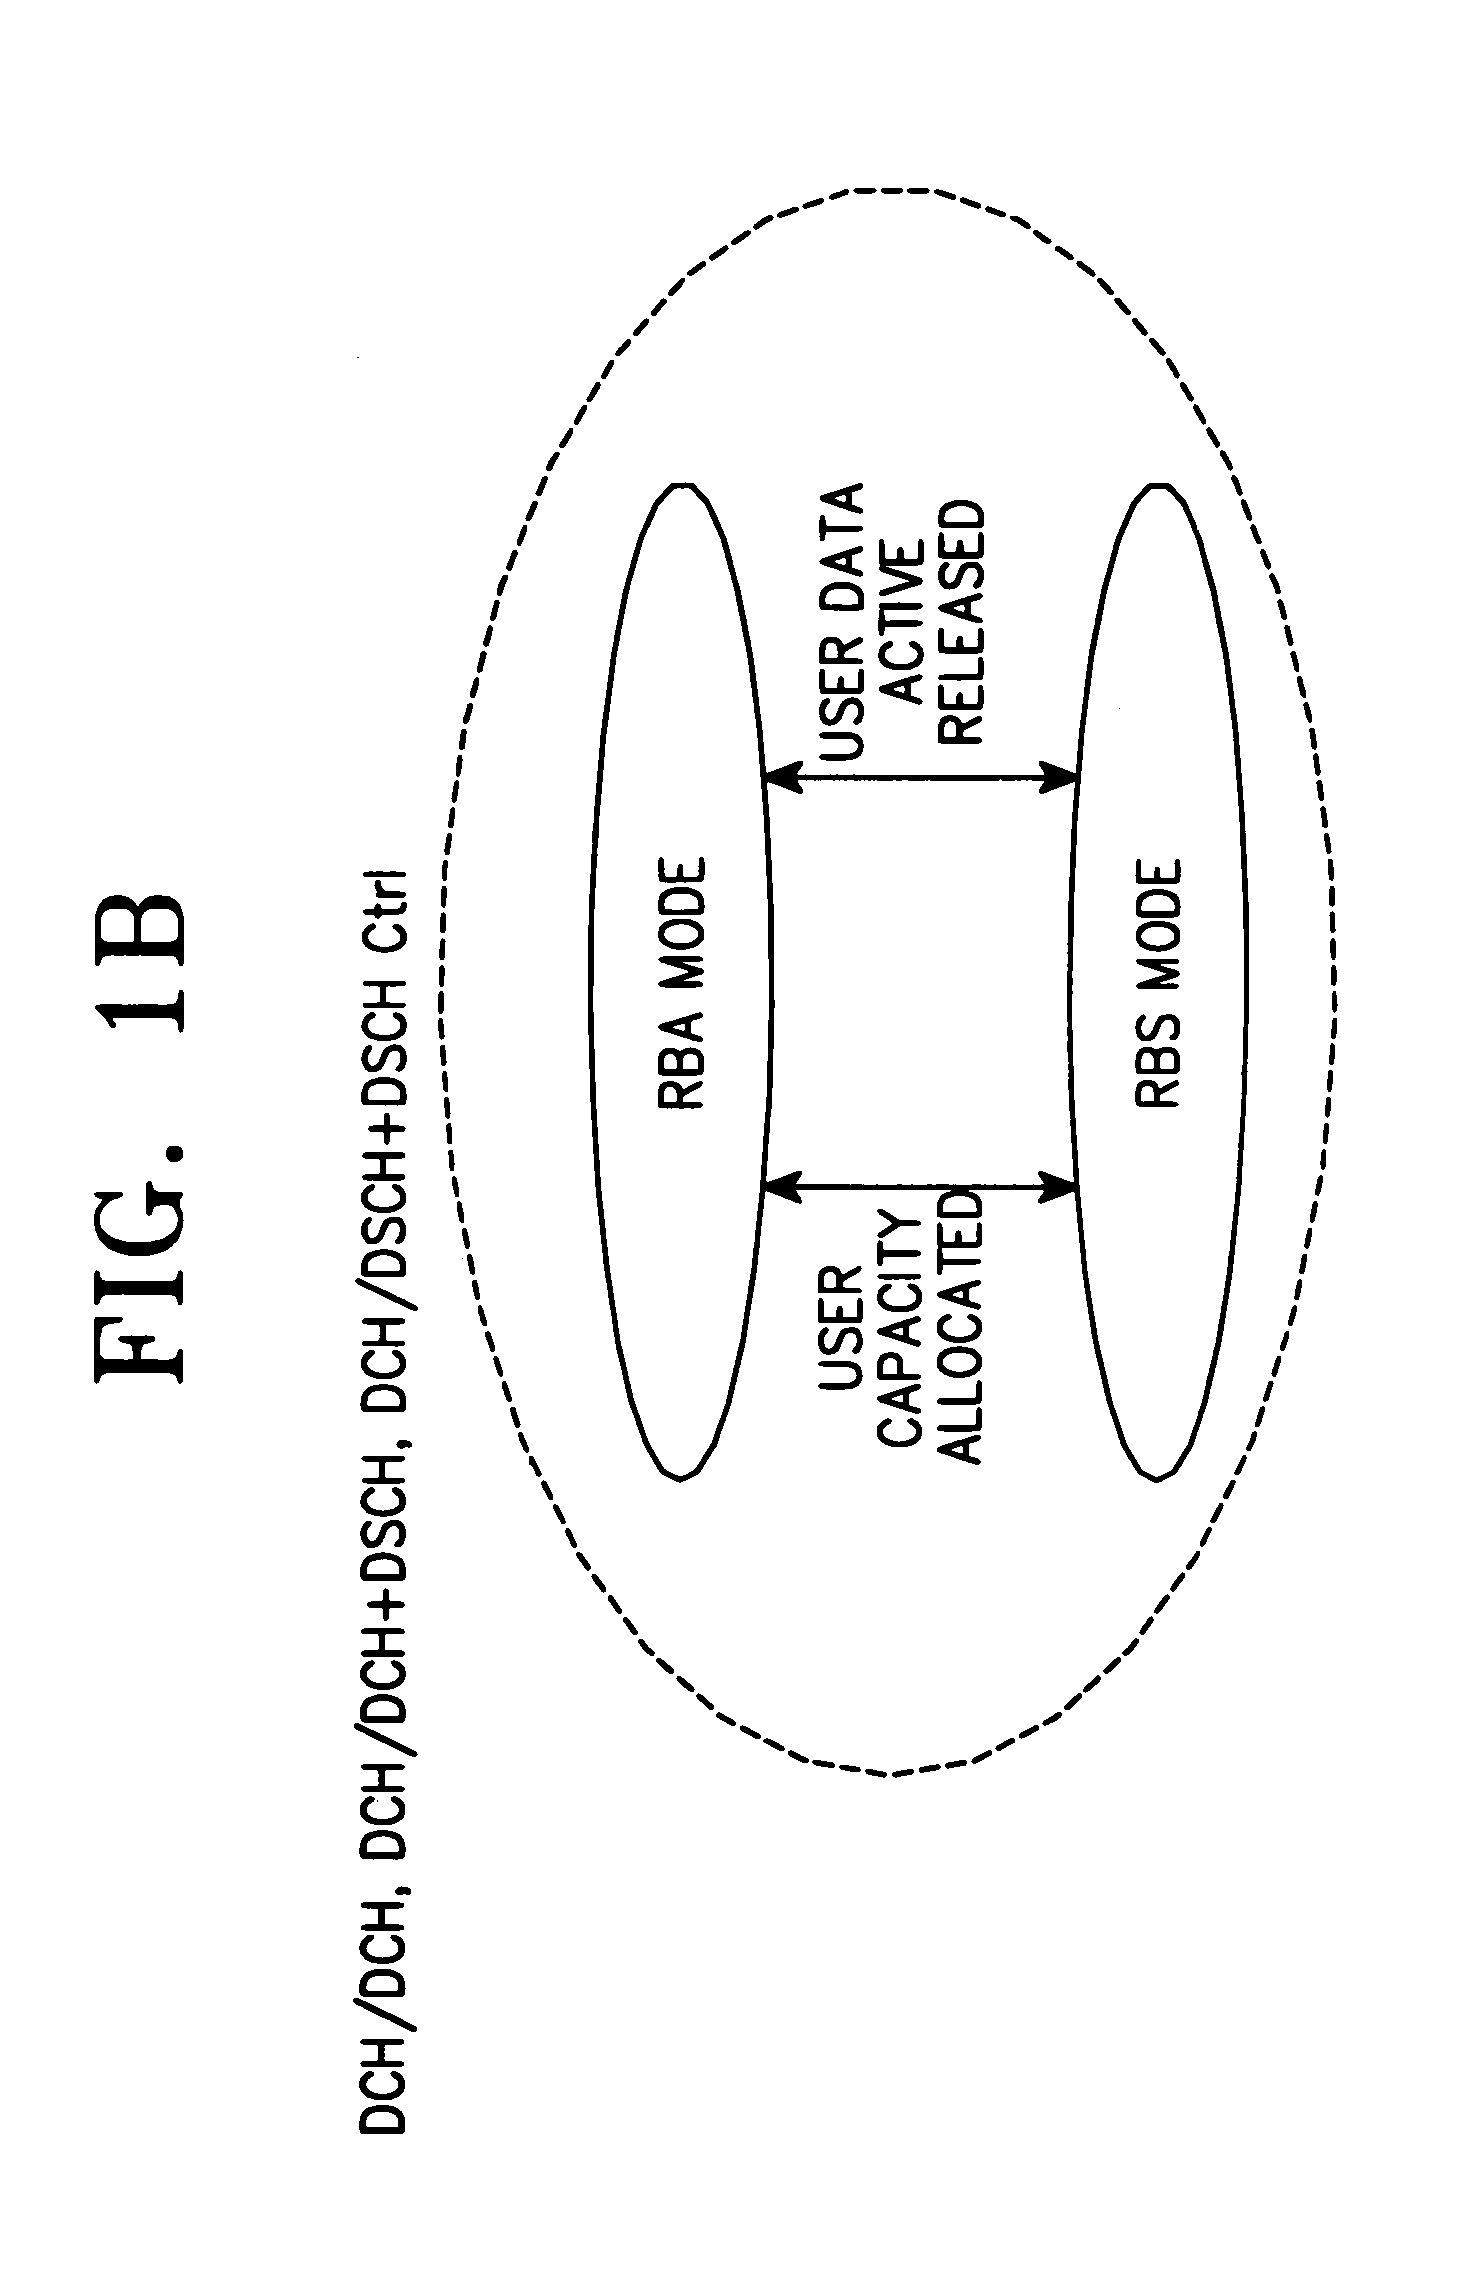 Apparatus and method for gating data on a control channel in a CDMA communication system